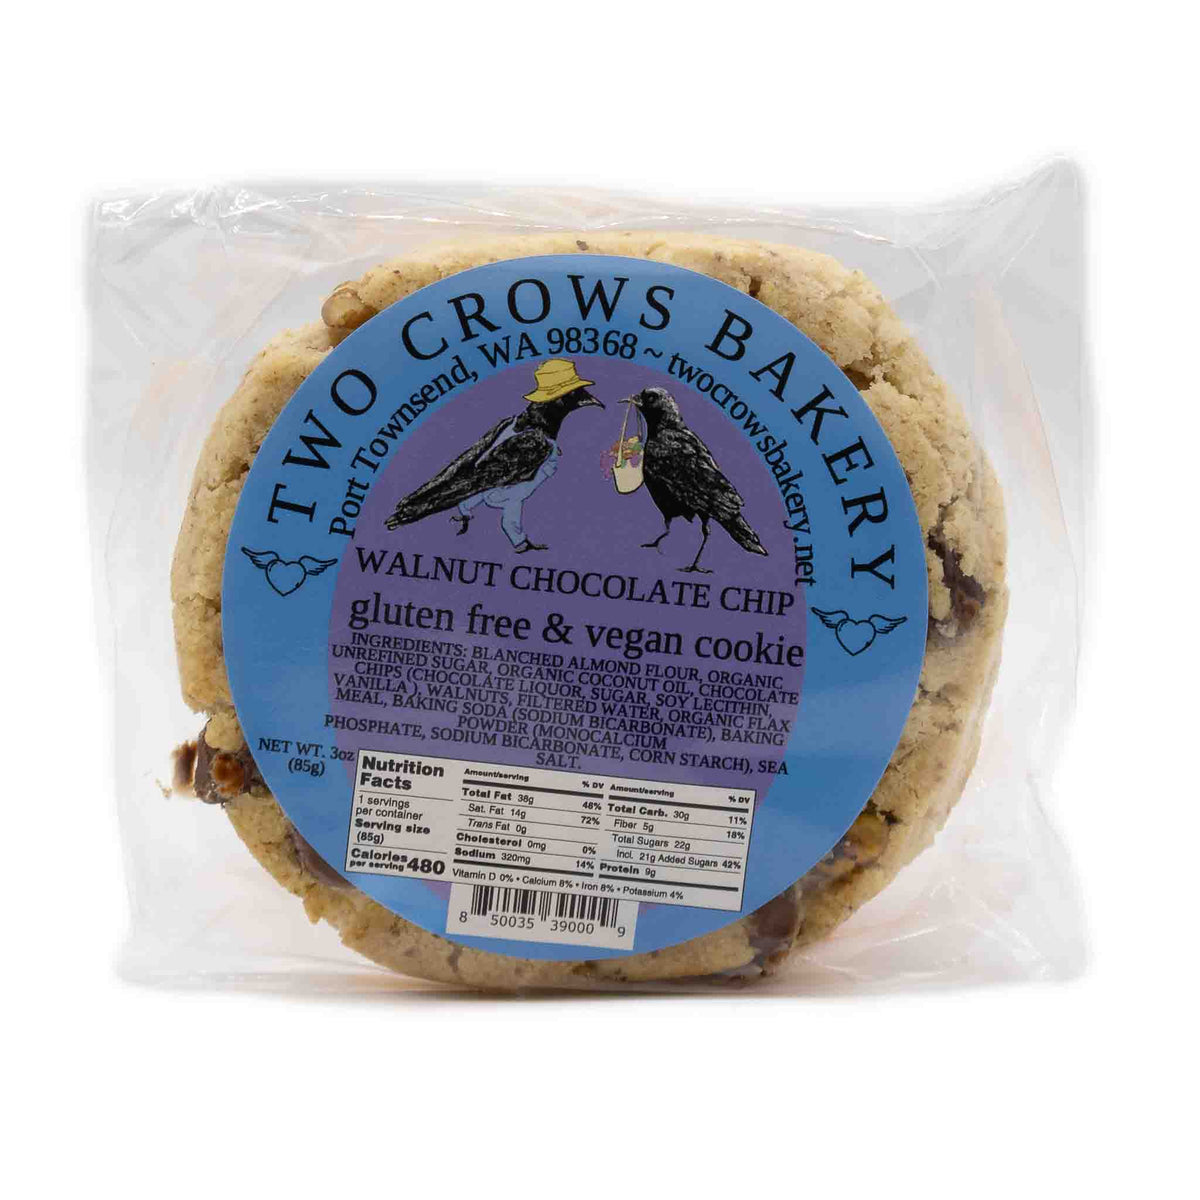 Two Crows Cookie Walnut Chocolate Chip